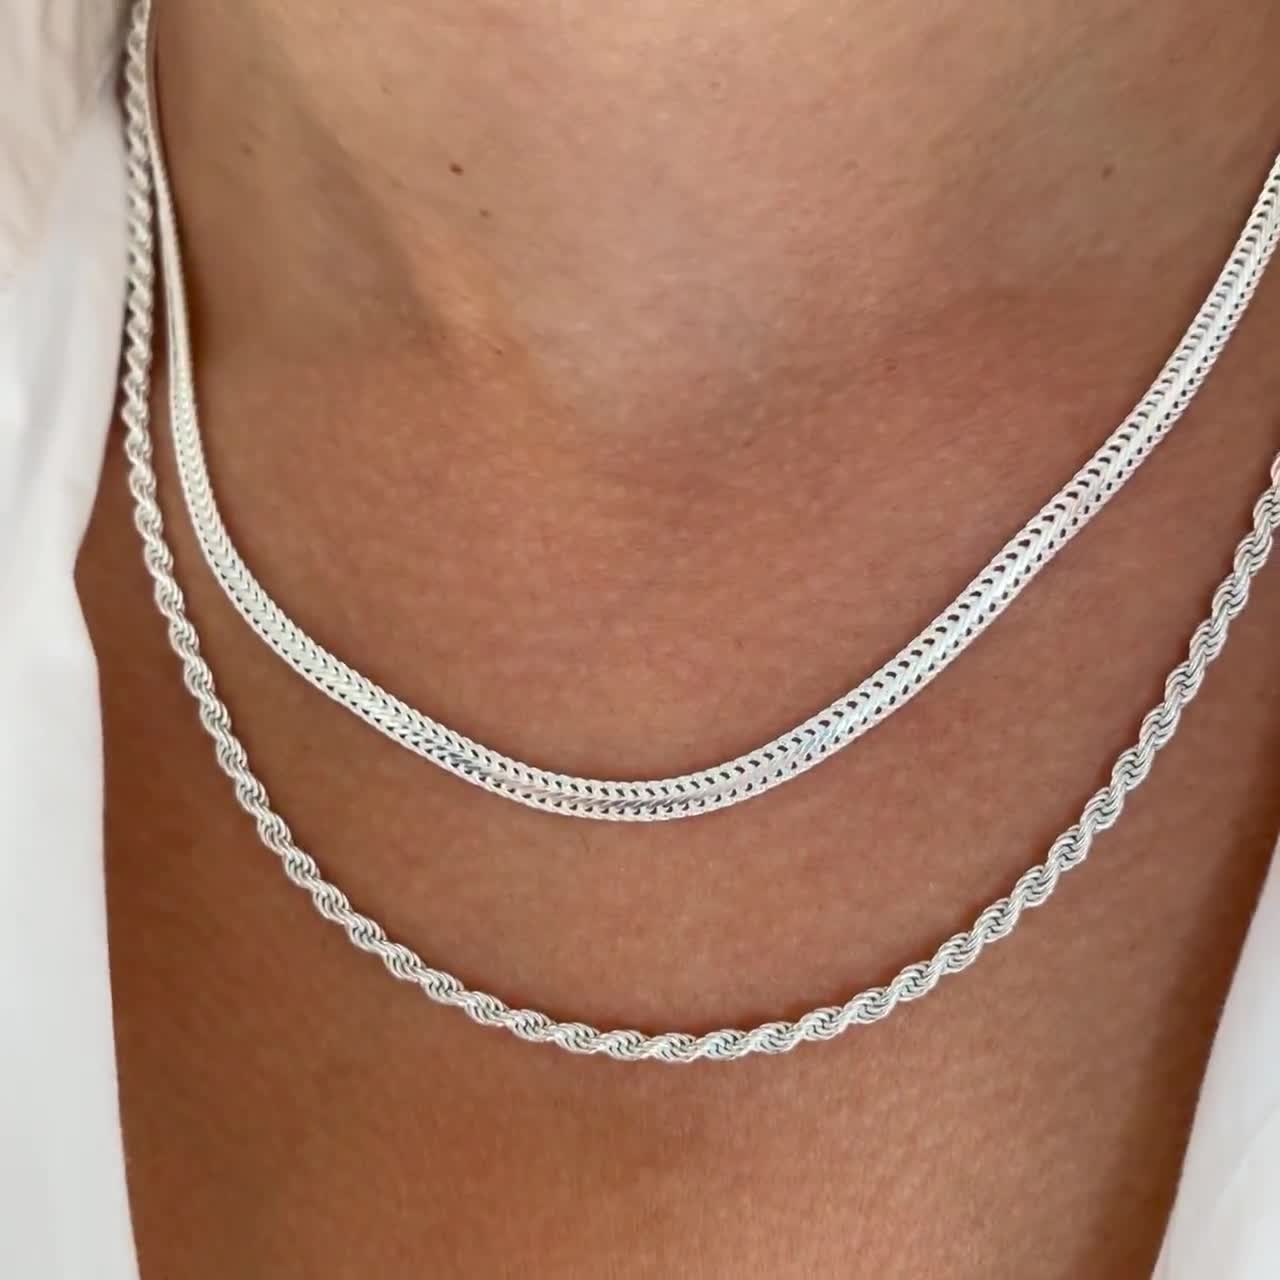 Silver Necklace Minimalist Necklace 925 Sterling High Quality Free Shipping Fine Twist Silver Chain Necklace